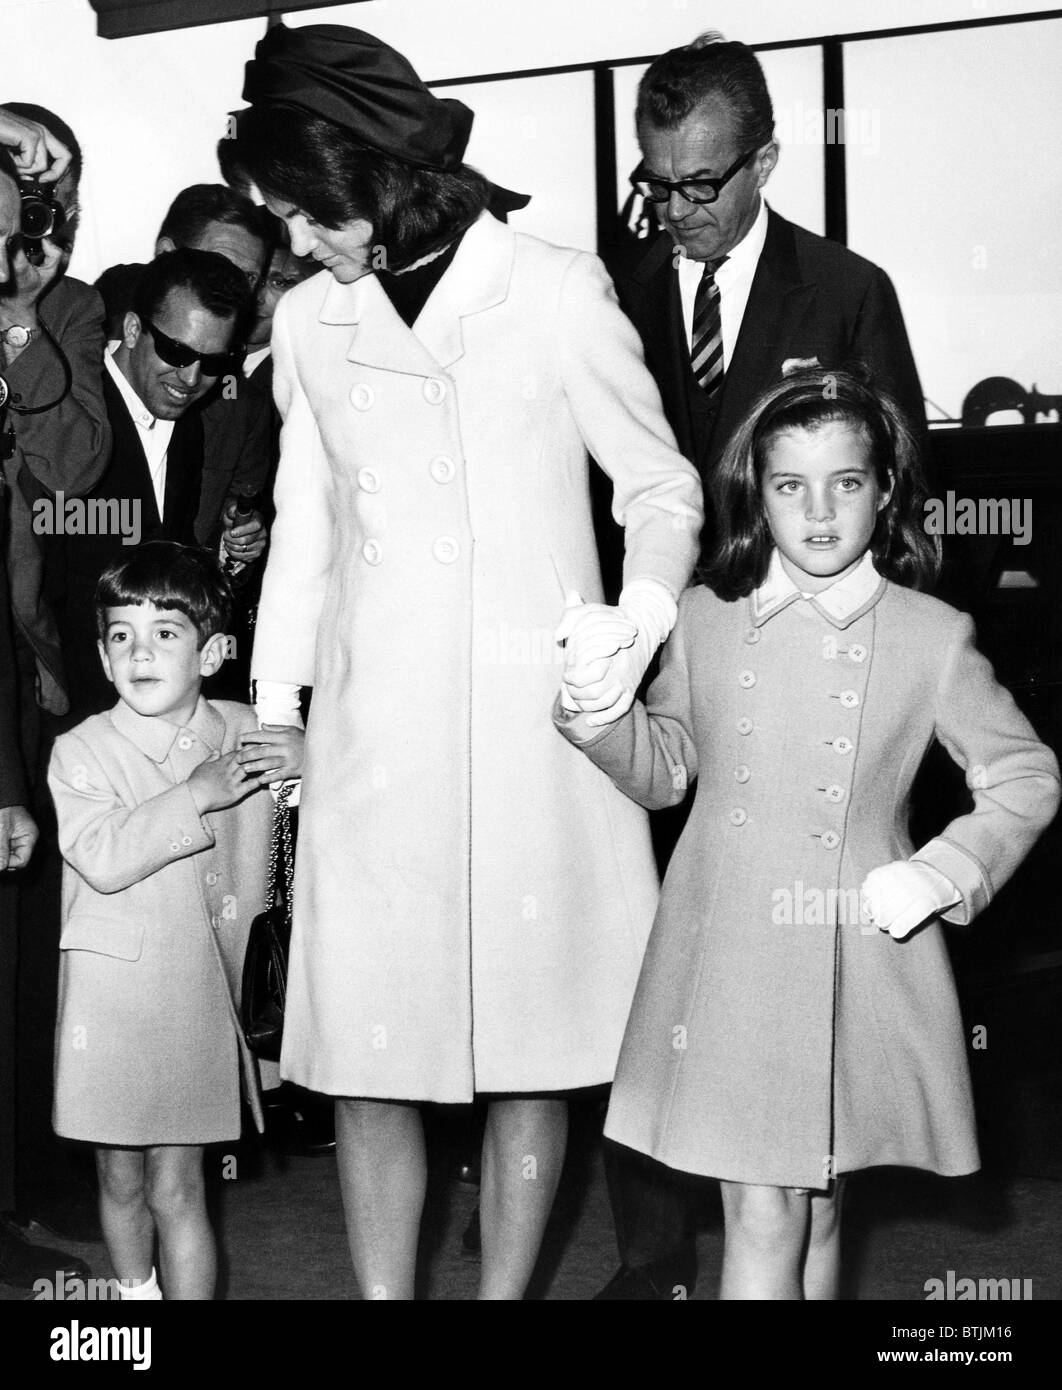 John F. Kennedy Jr., Jacqueline Kennedy, and Caroline Kennedy in the John F. Kennedy International Airport, New York, May 12, 19 Stock Photo